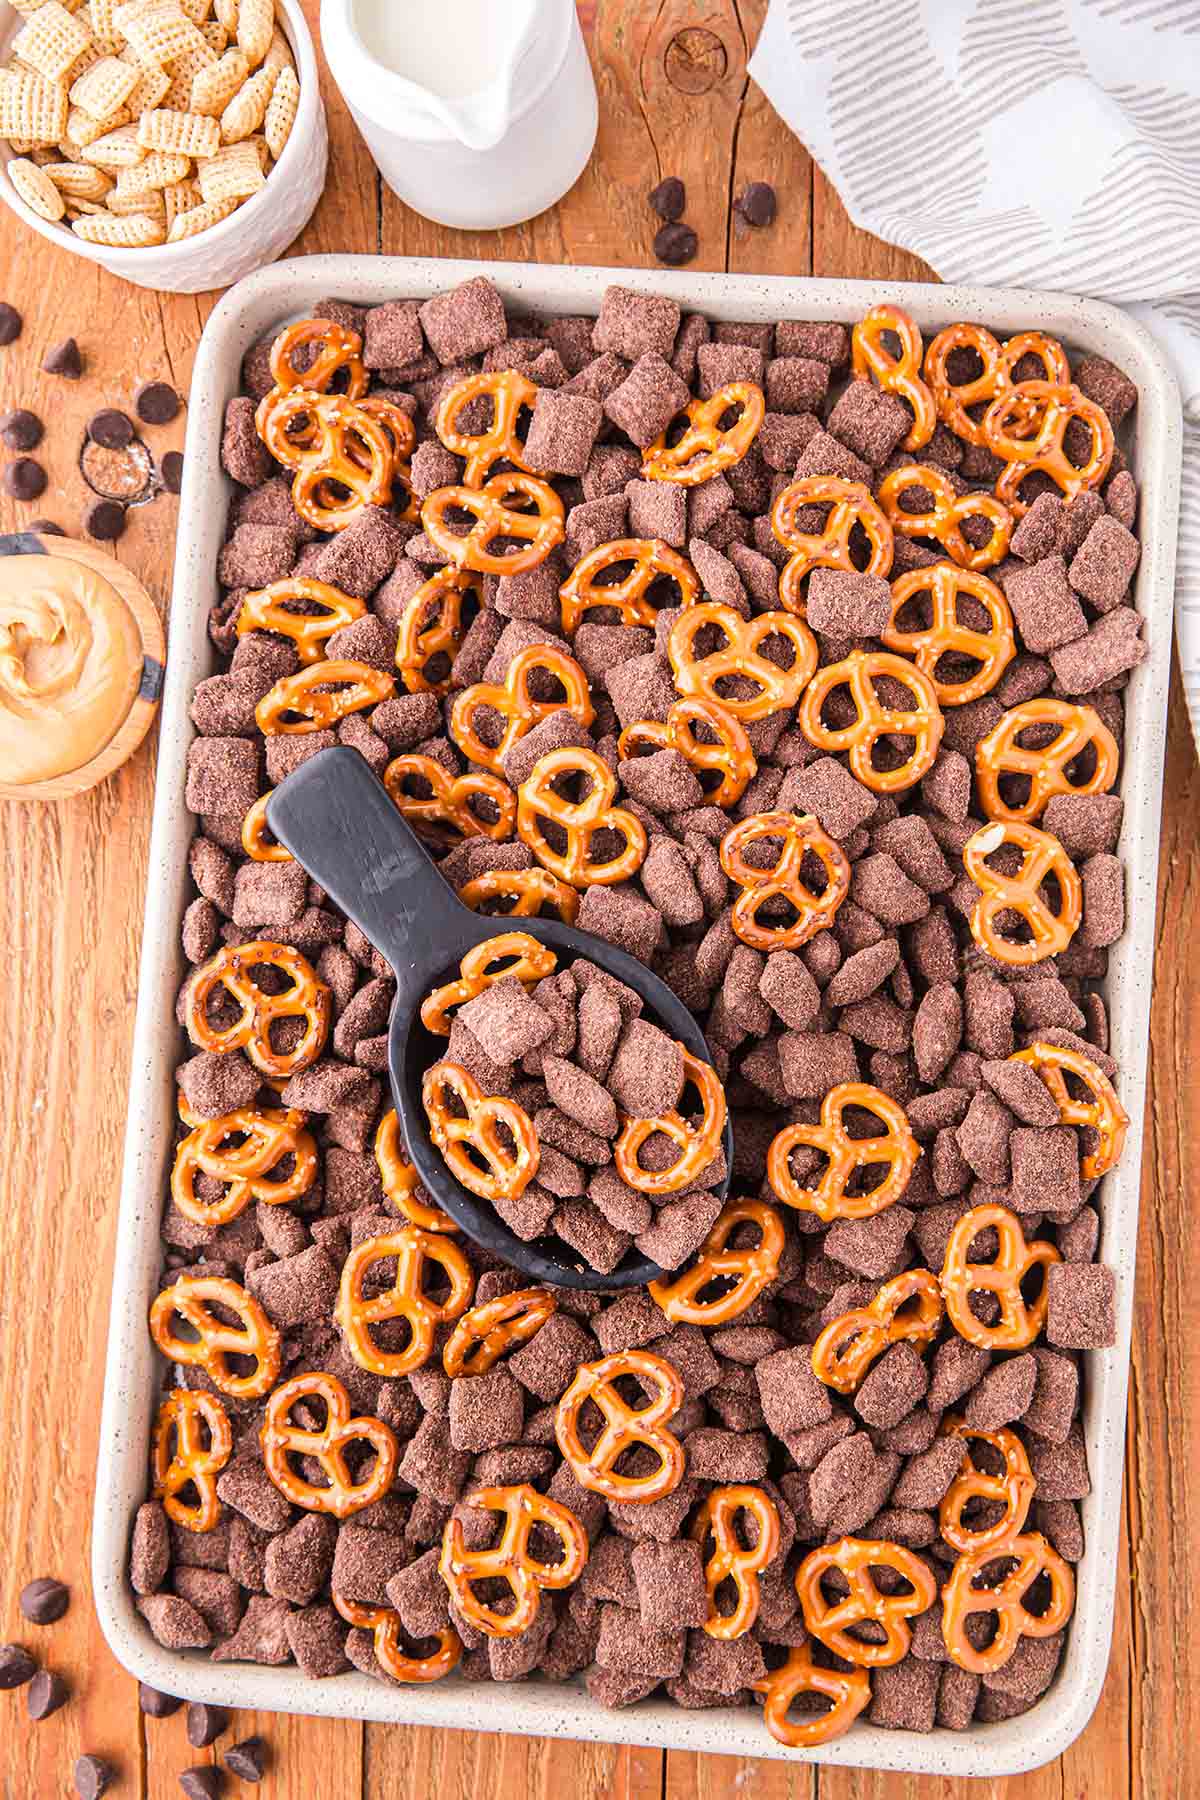 Brownie Batter Puppy Chow in a large baking tray with some pretzels on top.